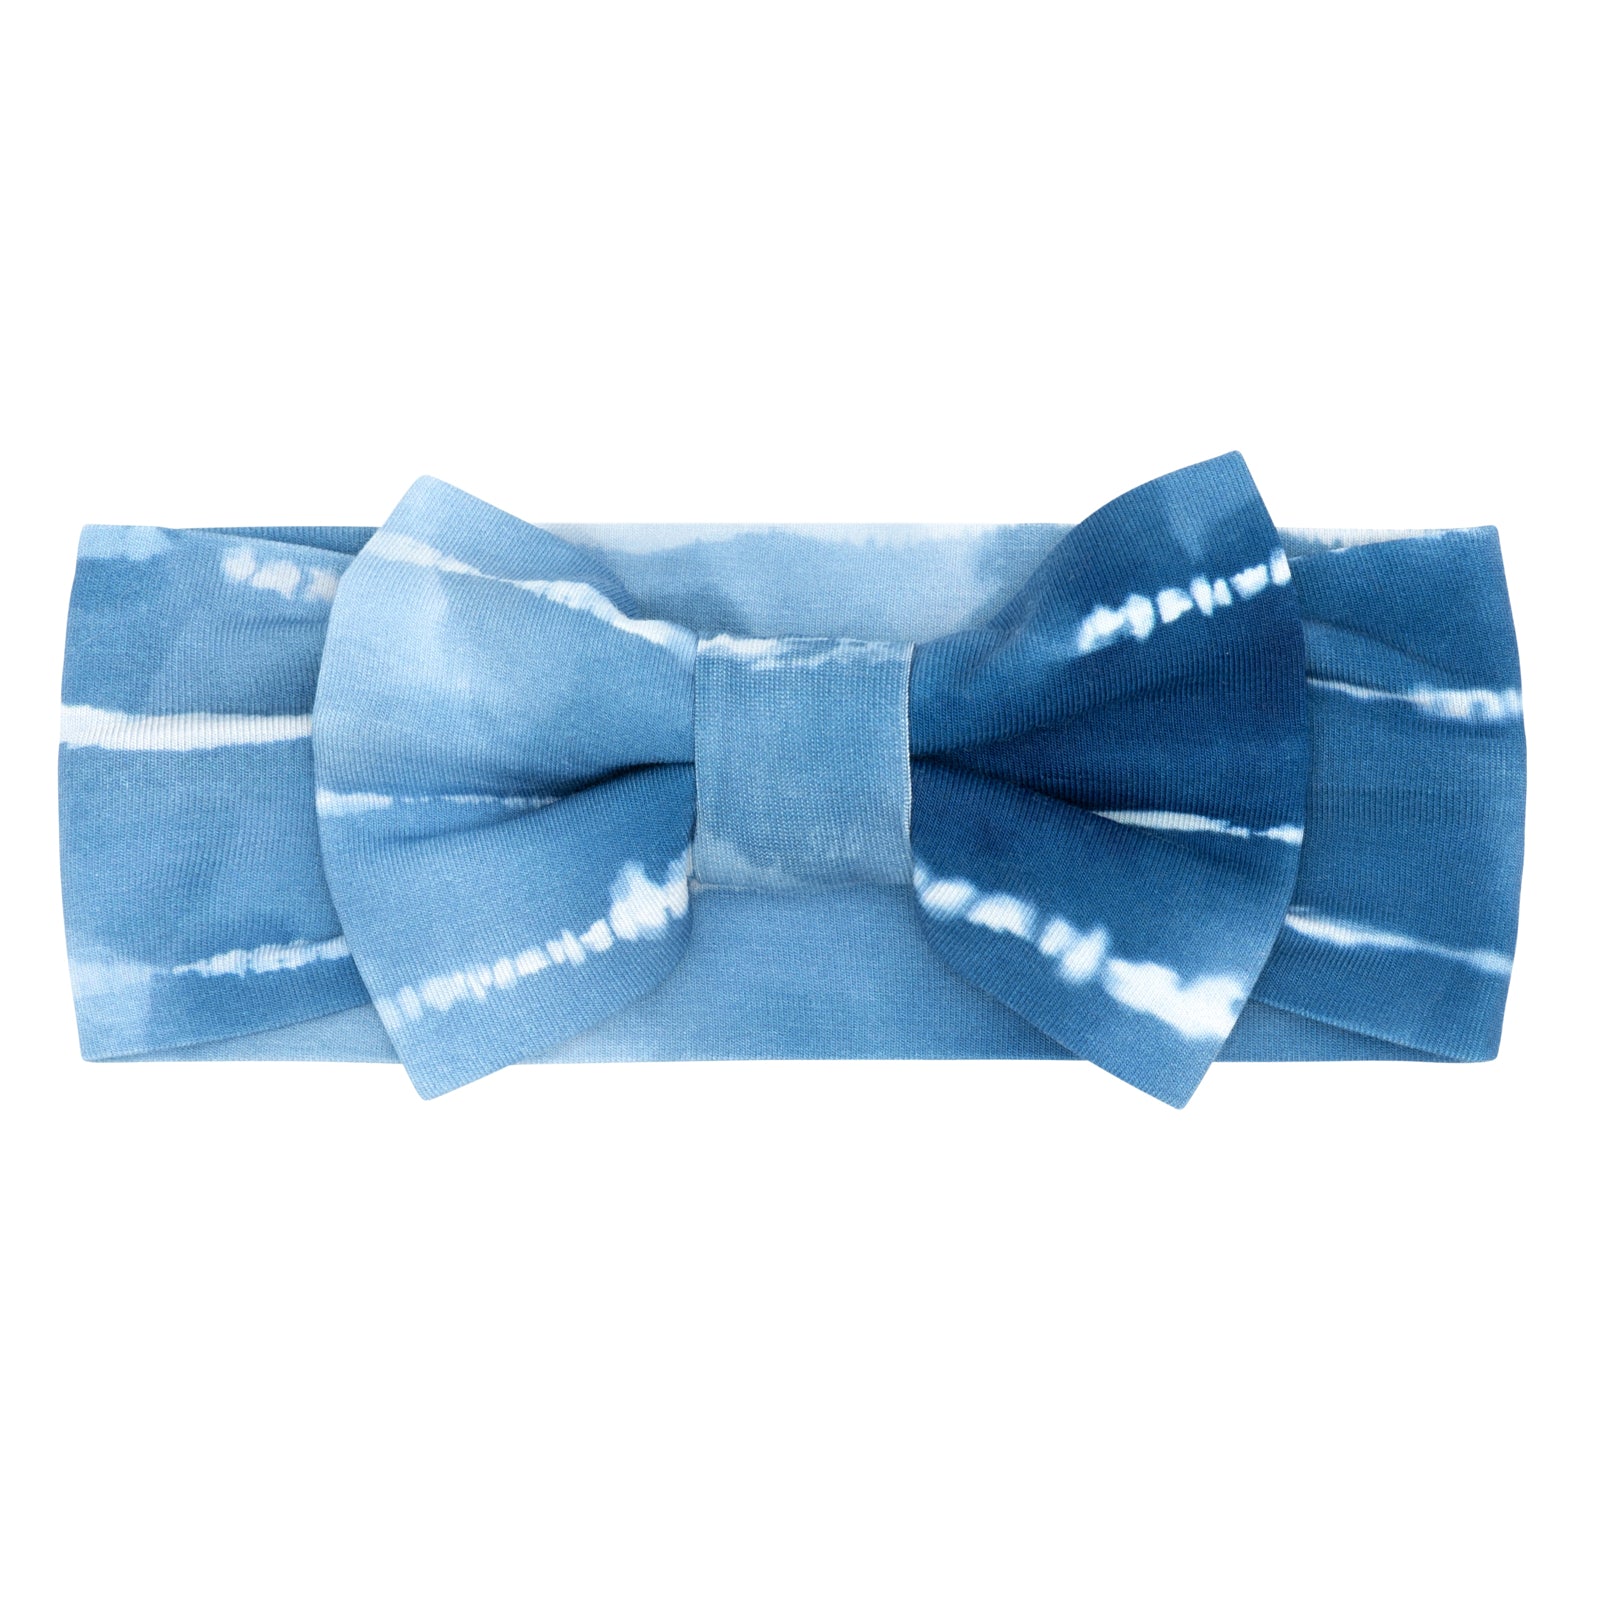 Flat lay image of a Blue Tie Dye Dreams luxe bow headband